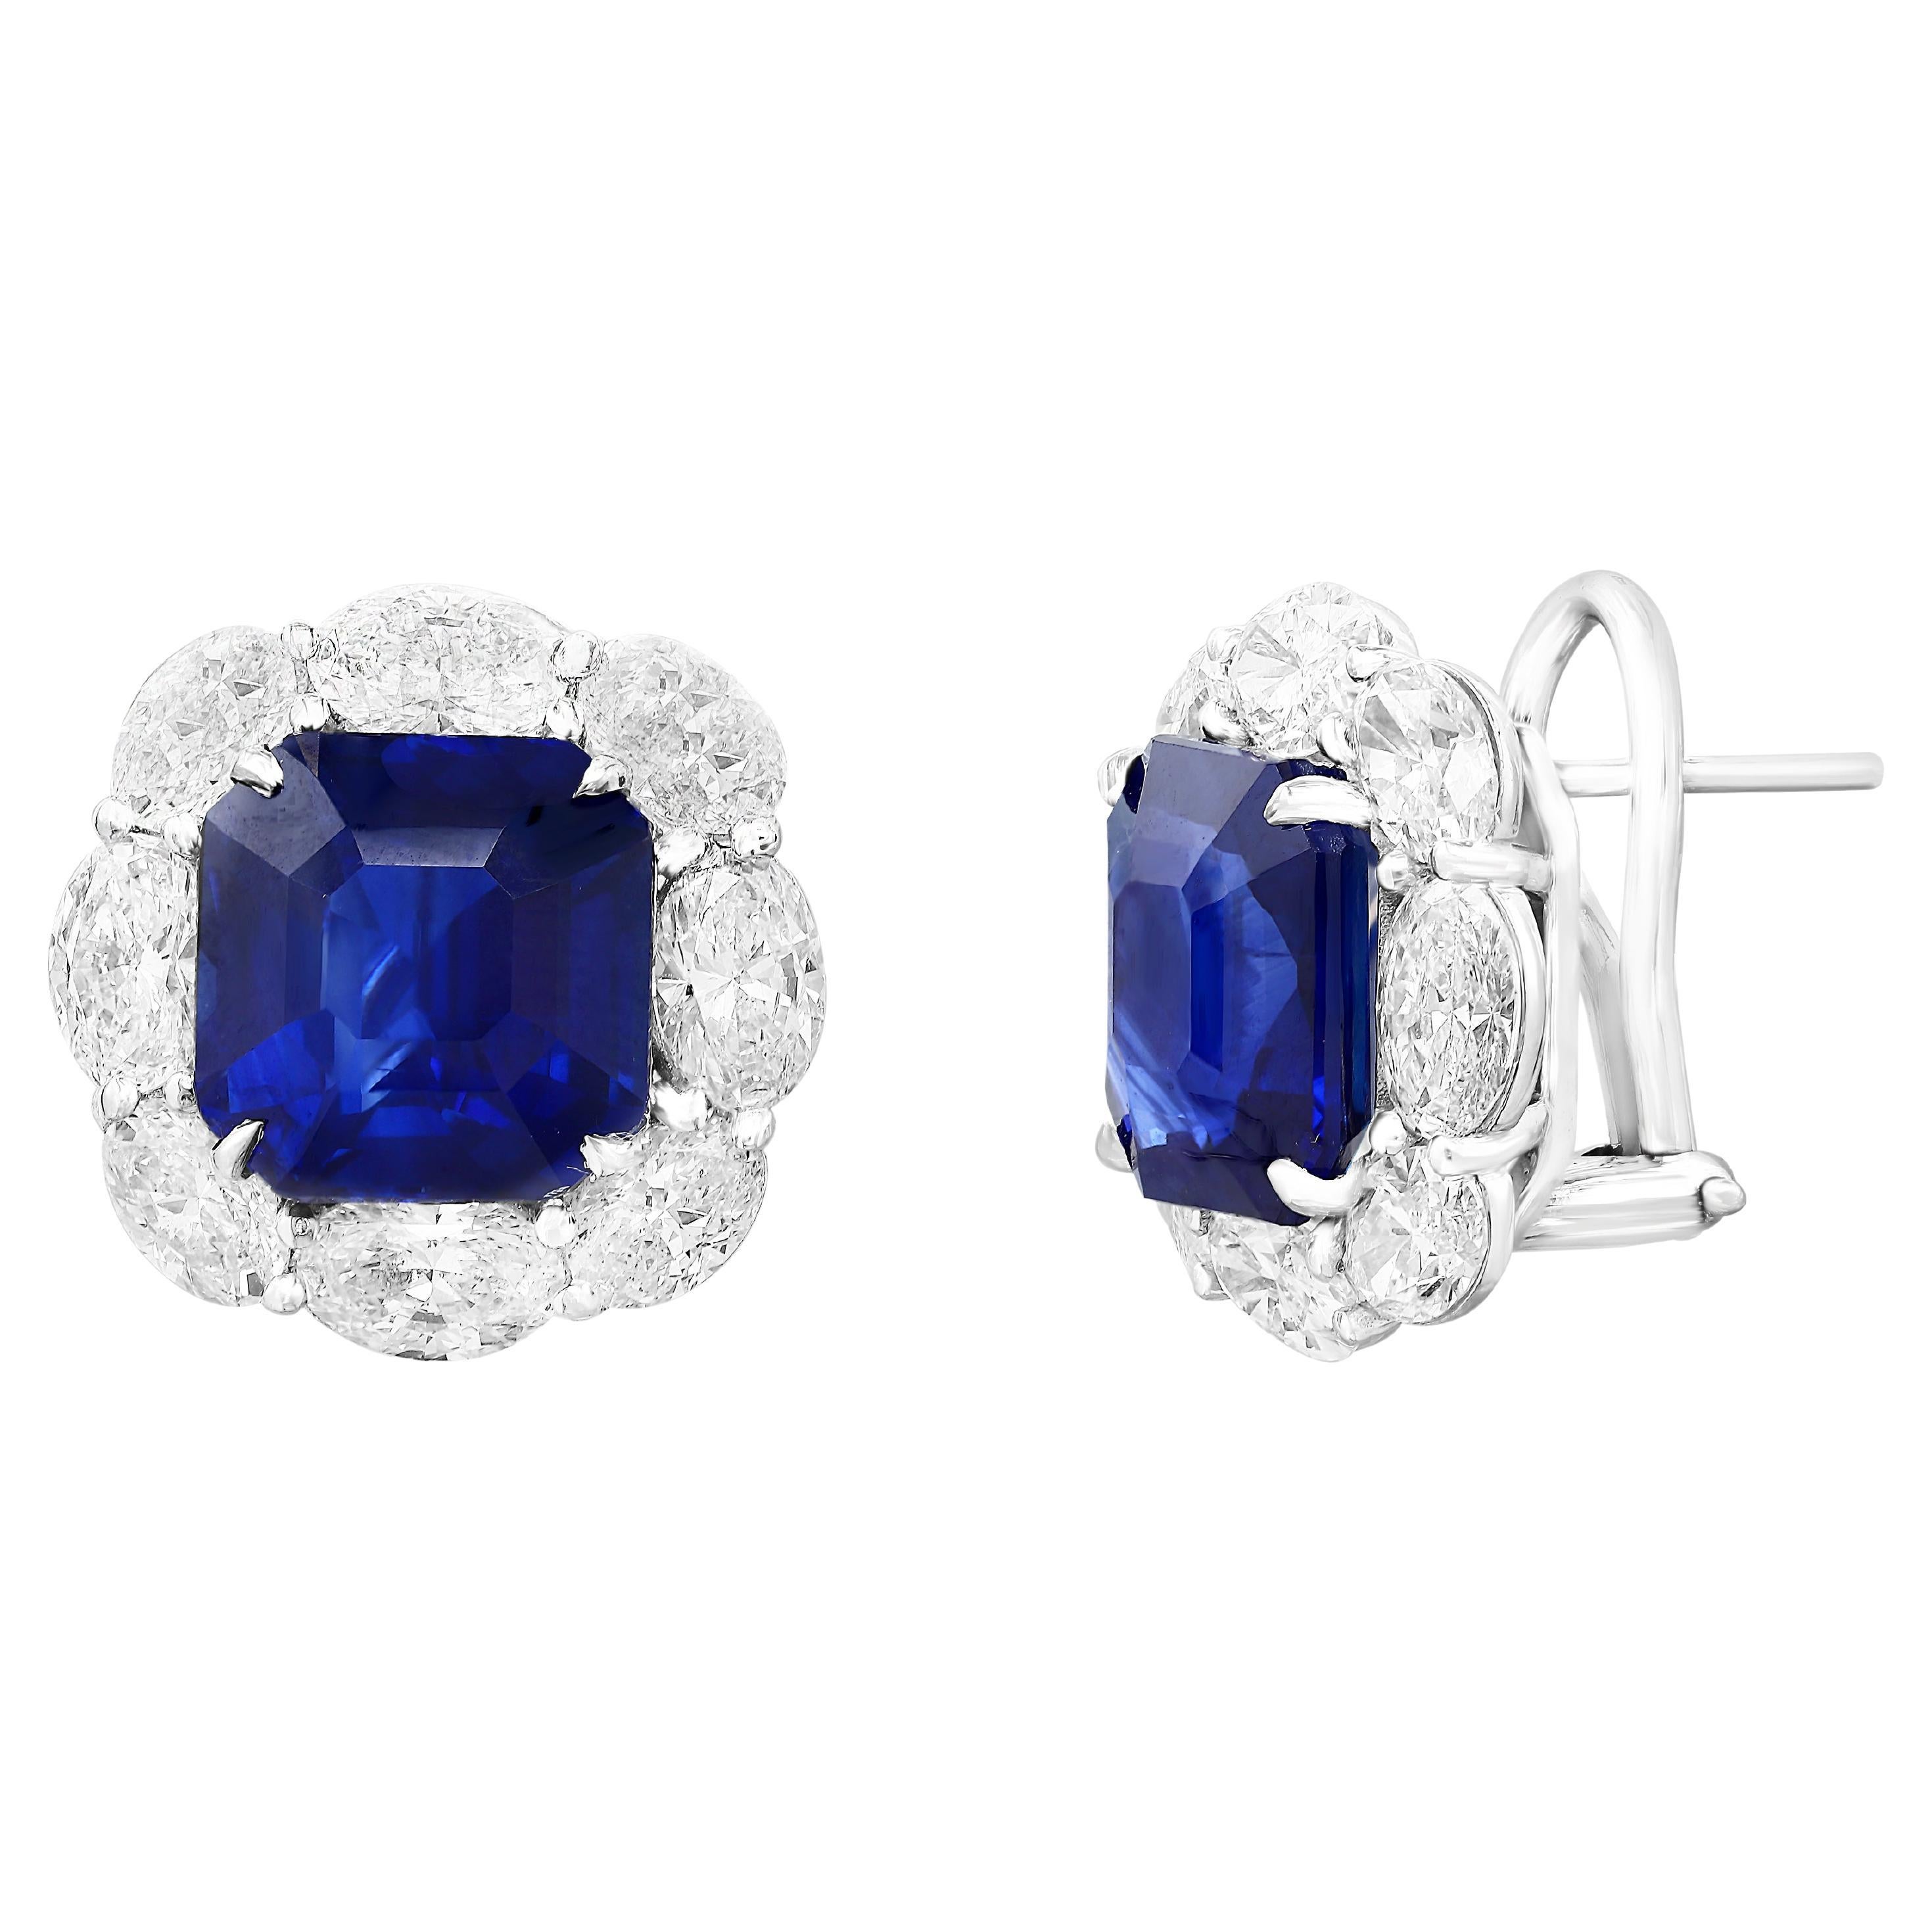 Antique Sapphire Earrings - 5,263 For Sale at 1stDibs | vintage ...